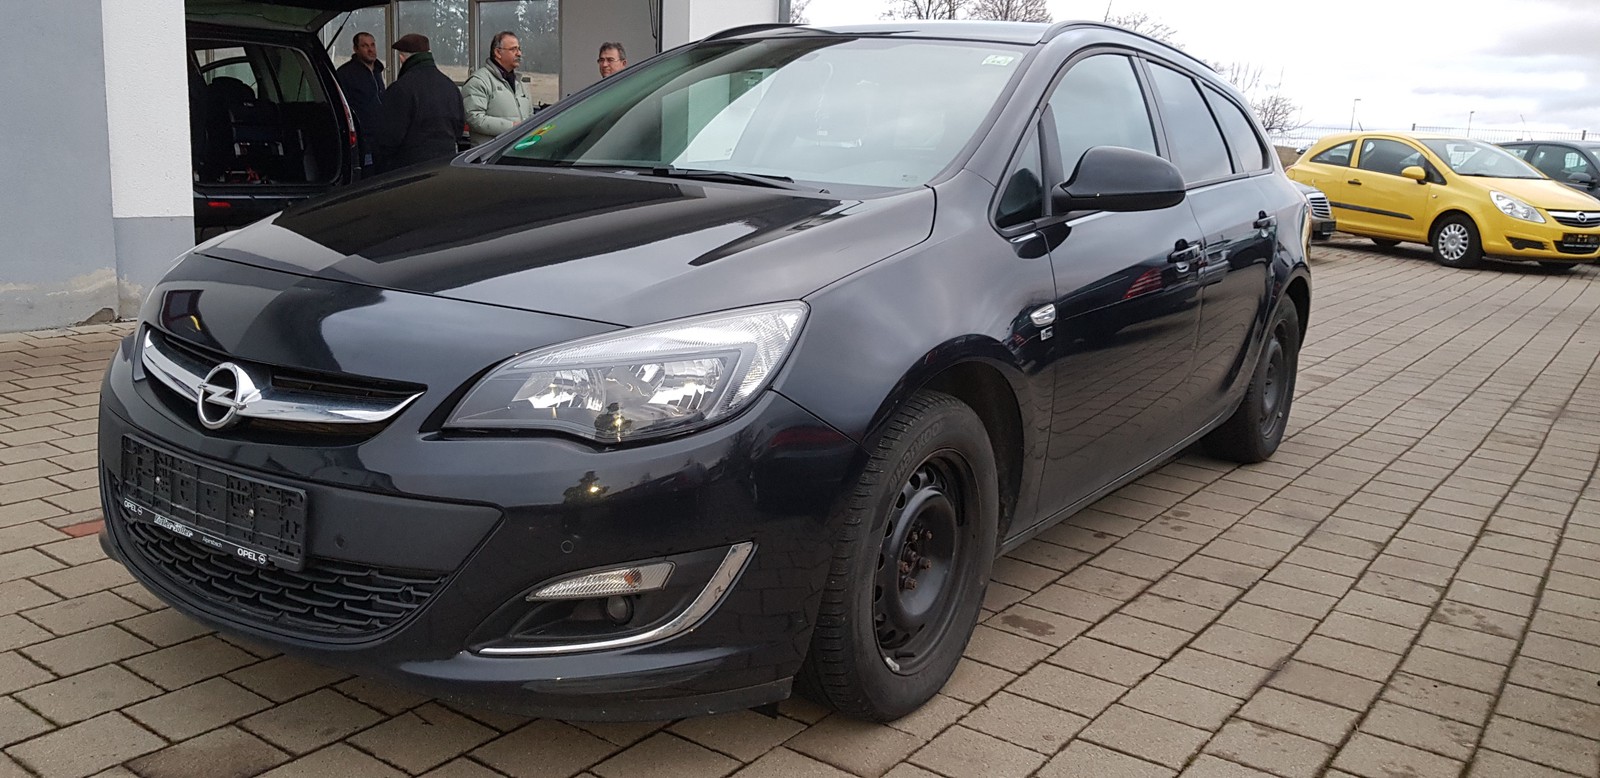 Opel Astra J Sports Tourer 150 Jahre used buy in Zimmern ob Rottweil -  Int.Nr.: 958 SOLD